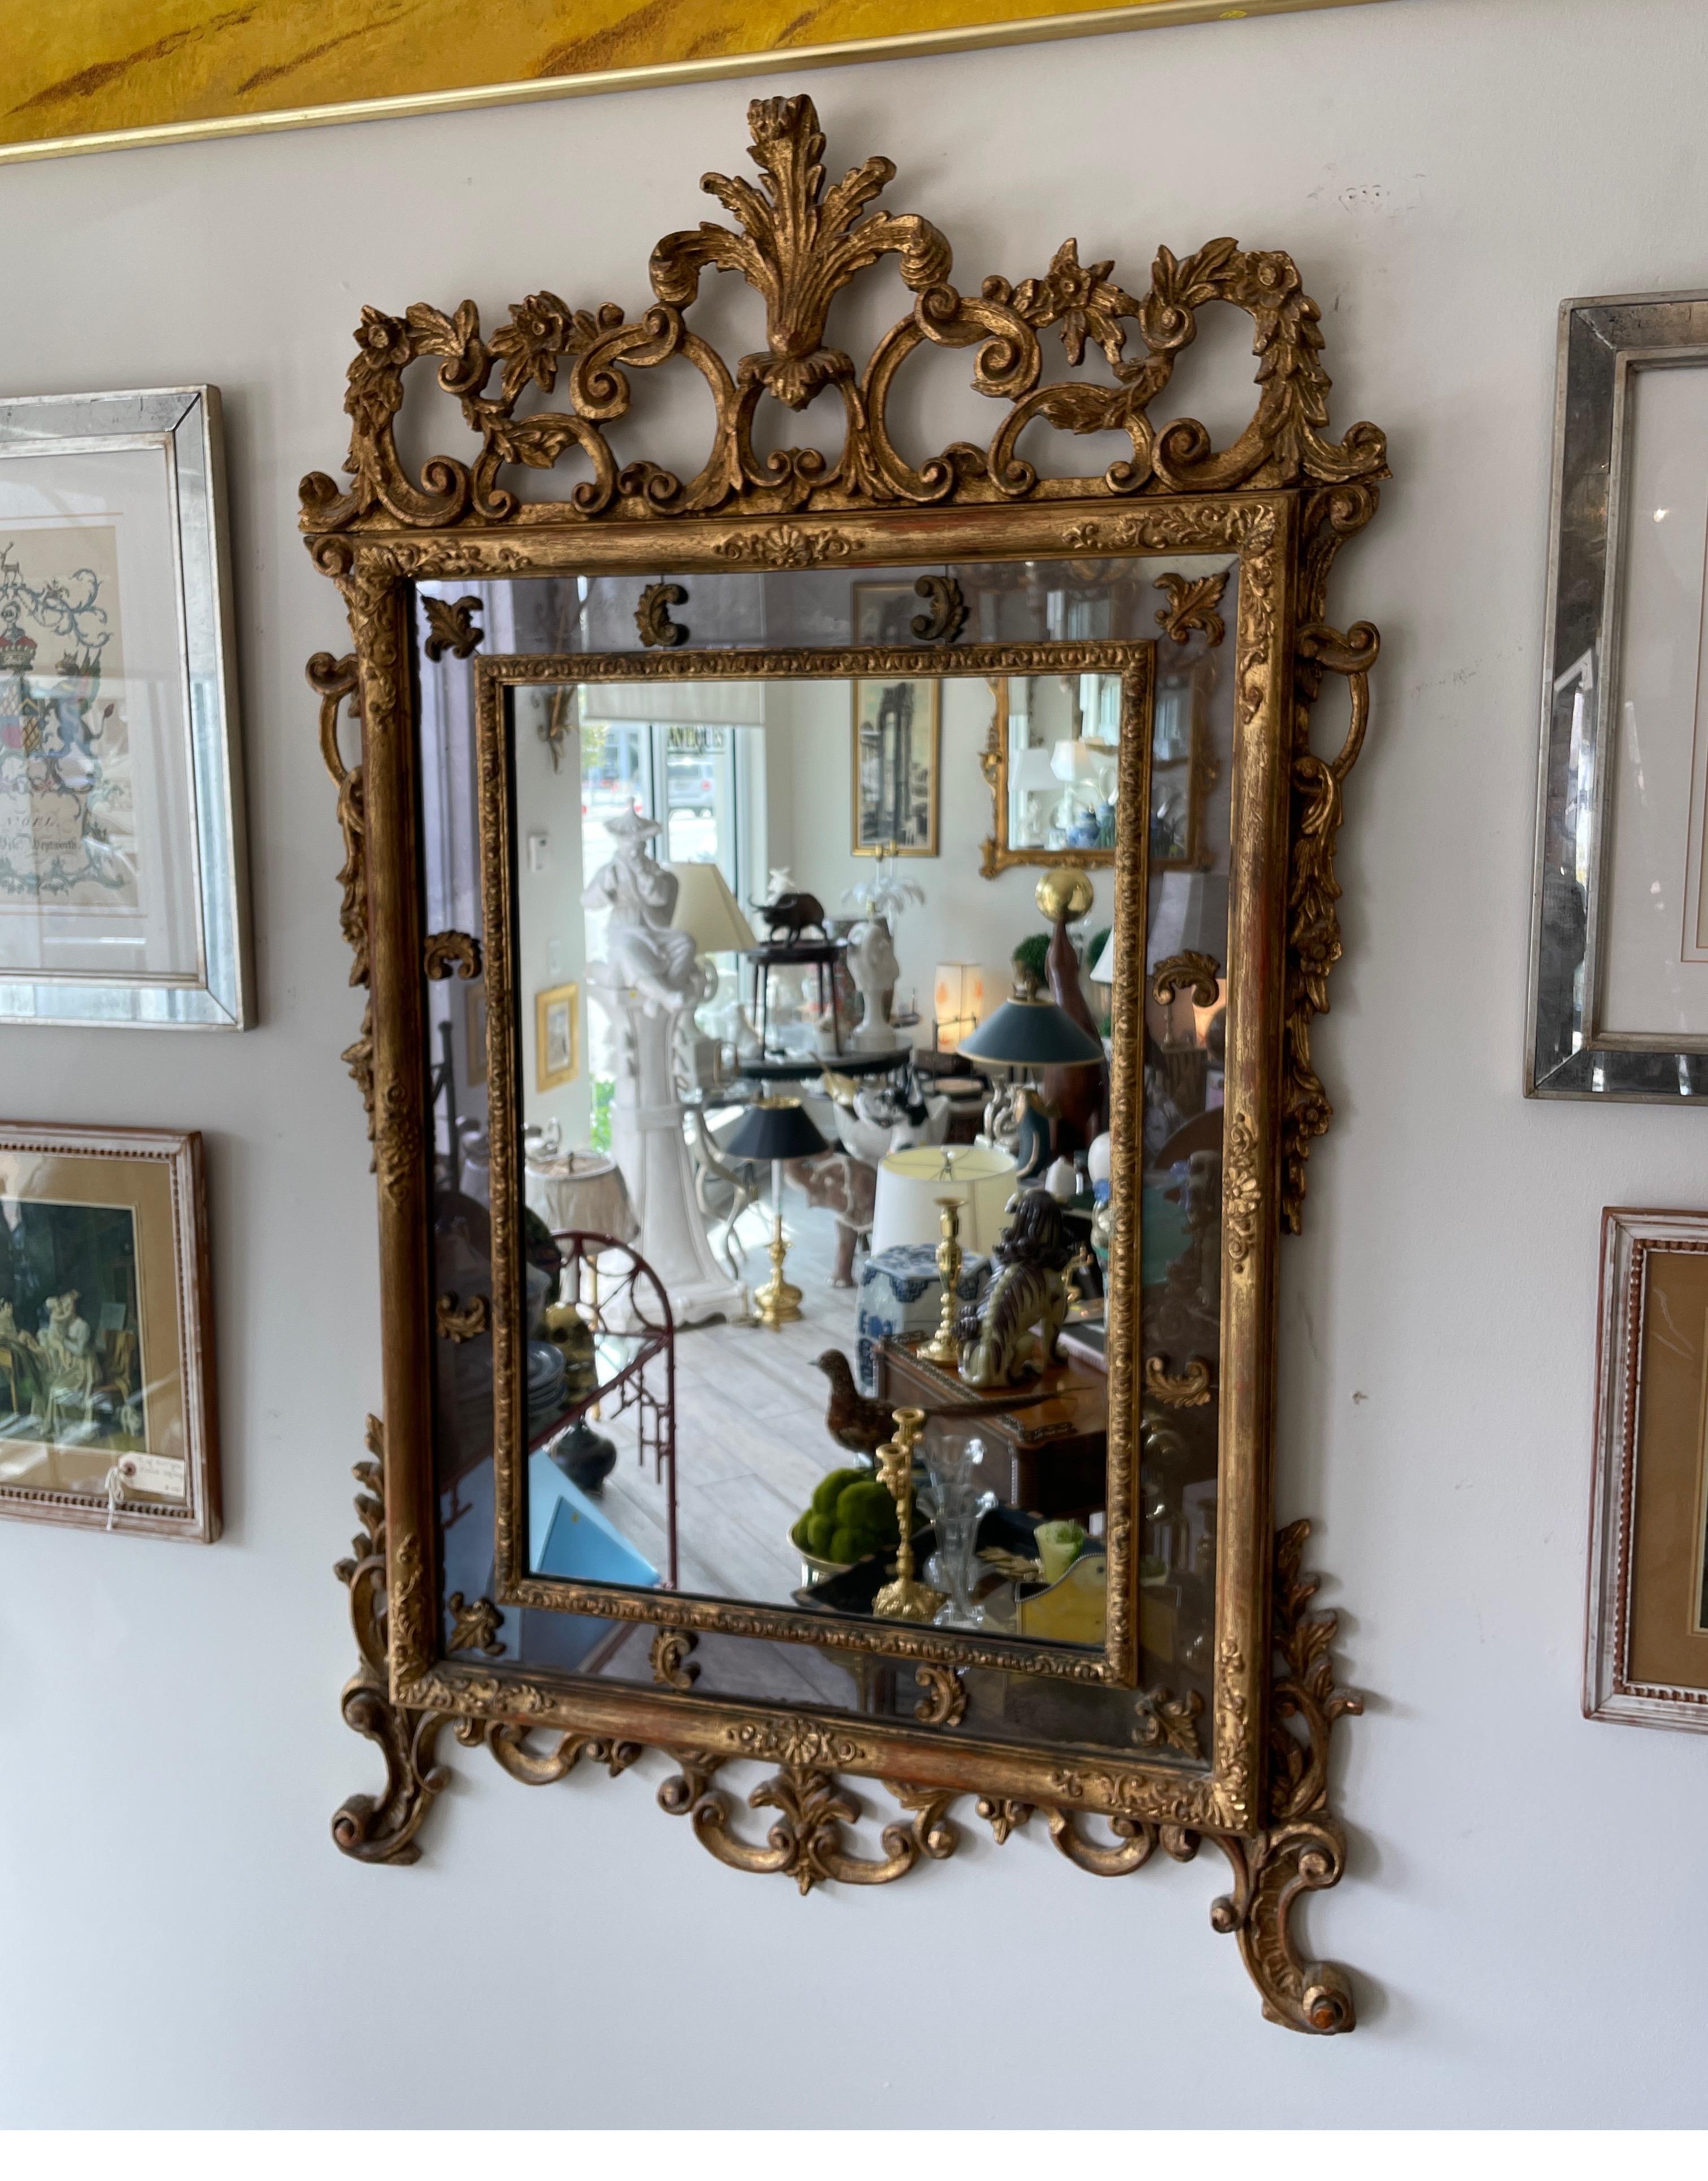 Exceptional carved and gilded Italian mirror. Center clear mirror plate with a surround of smoked mirror adorned with carved fleur de Lys pieces. The entire outside of mirror is adorned with carvings & topped with a large plume.